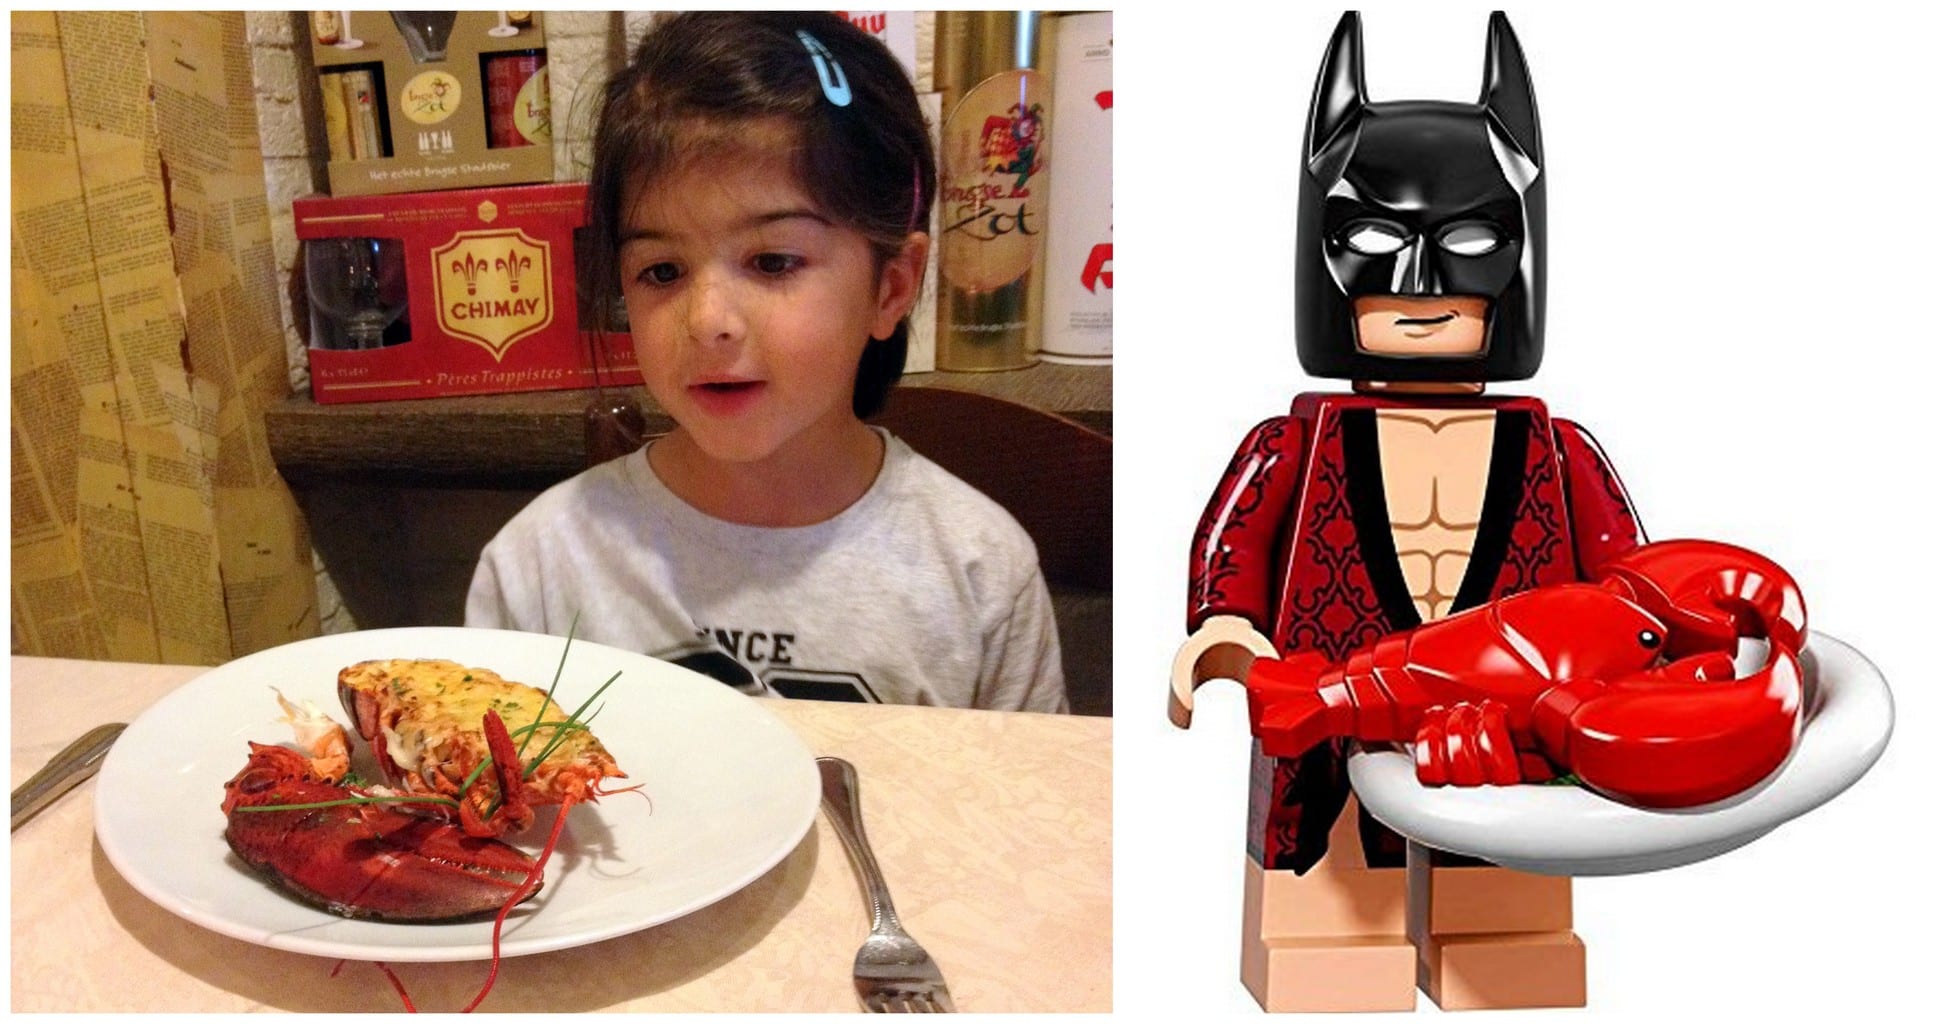 A little LEGO Batman fan being served her first Lobster Thermidor